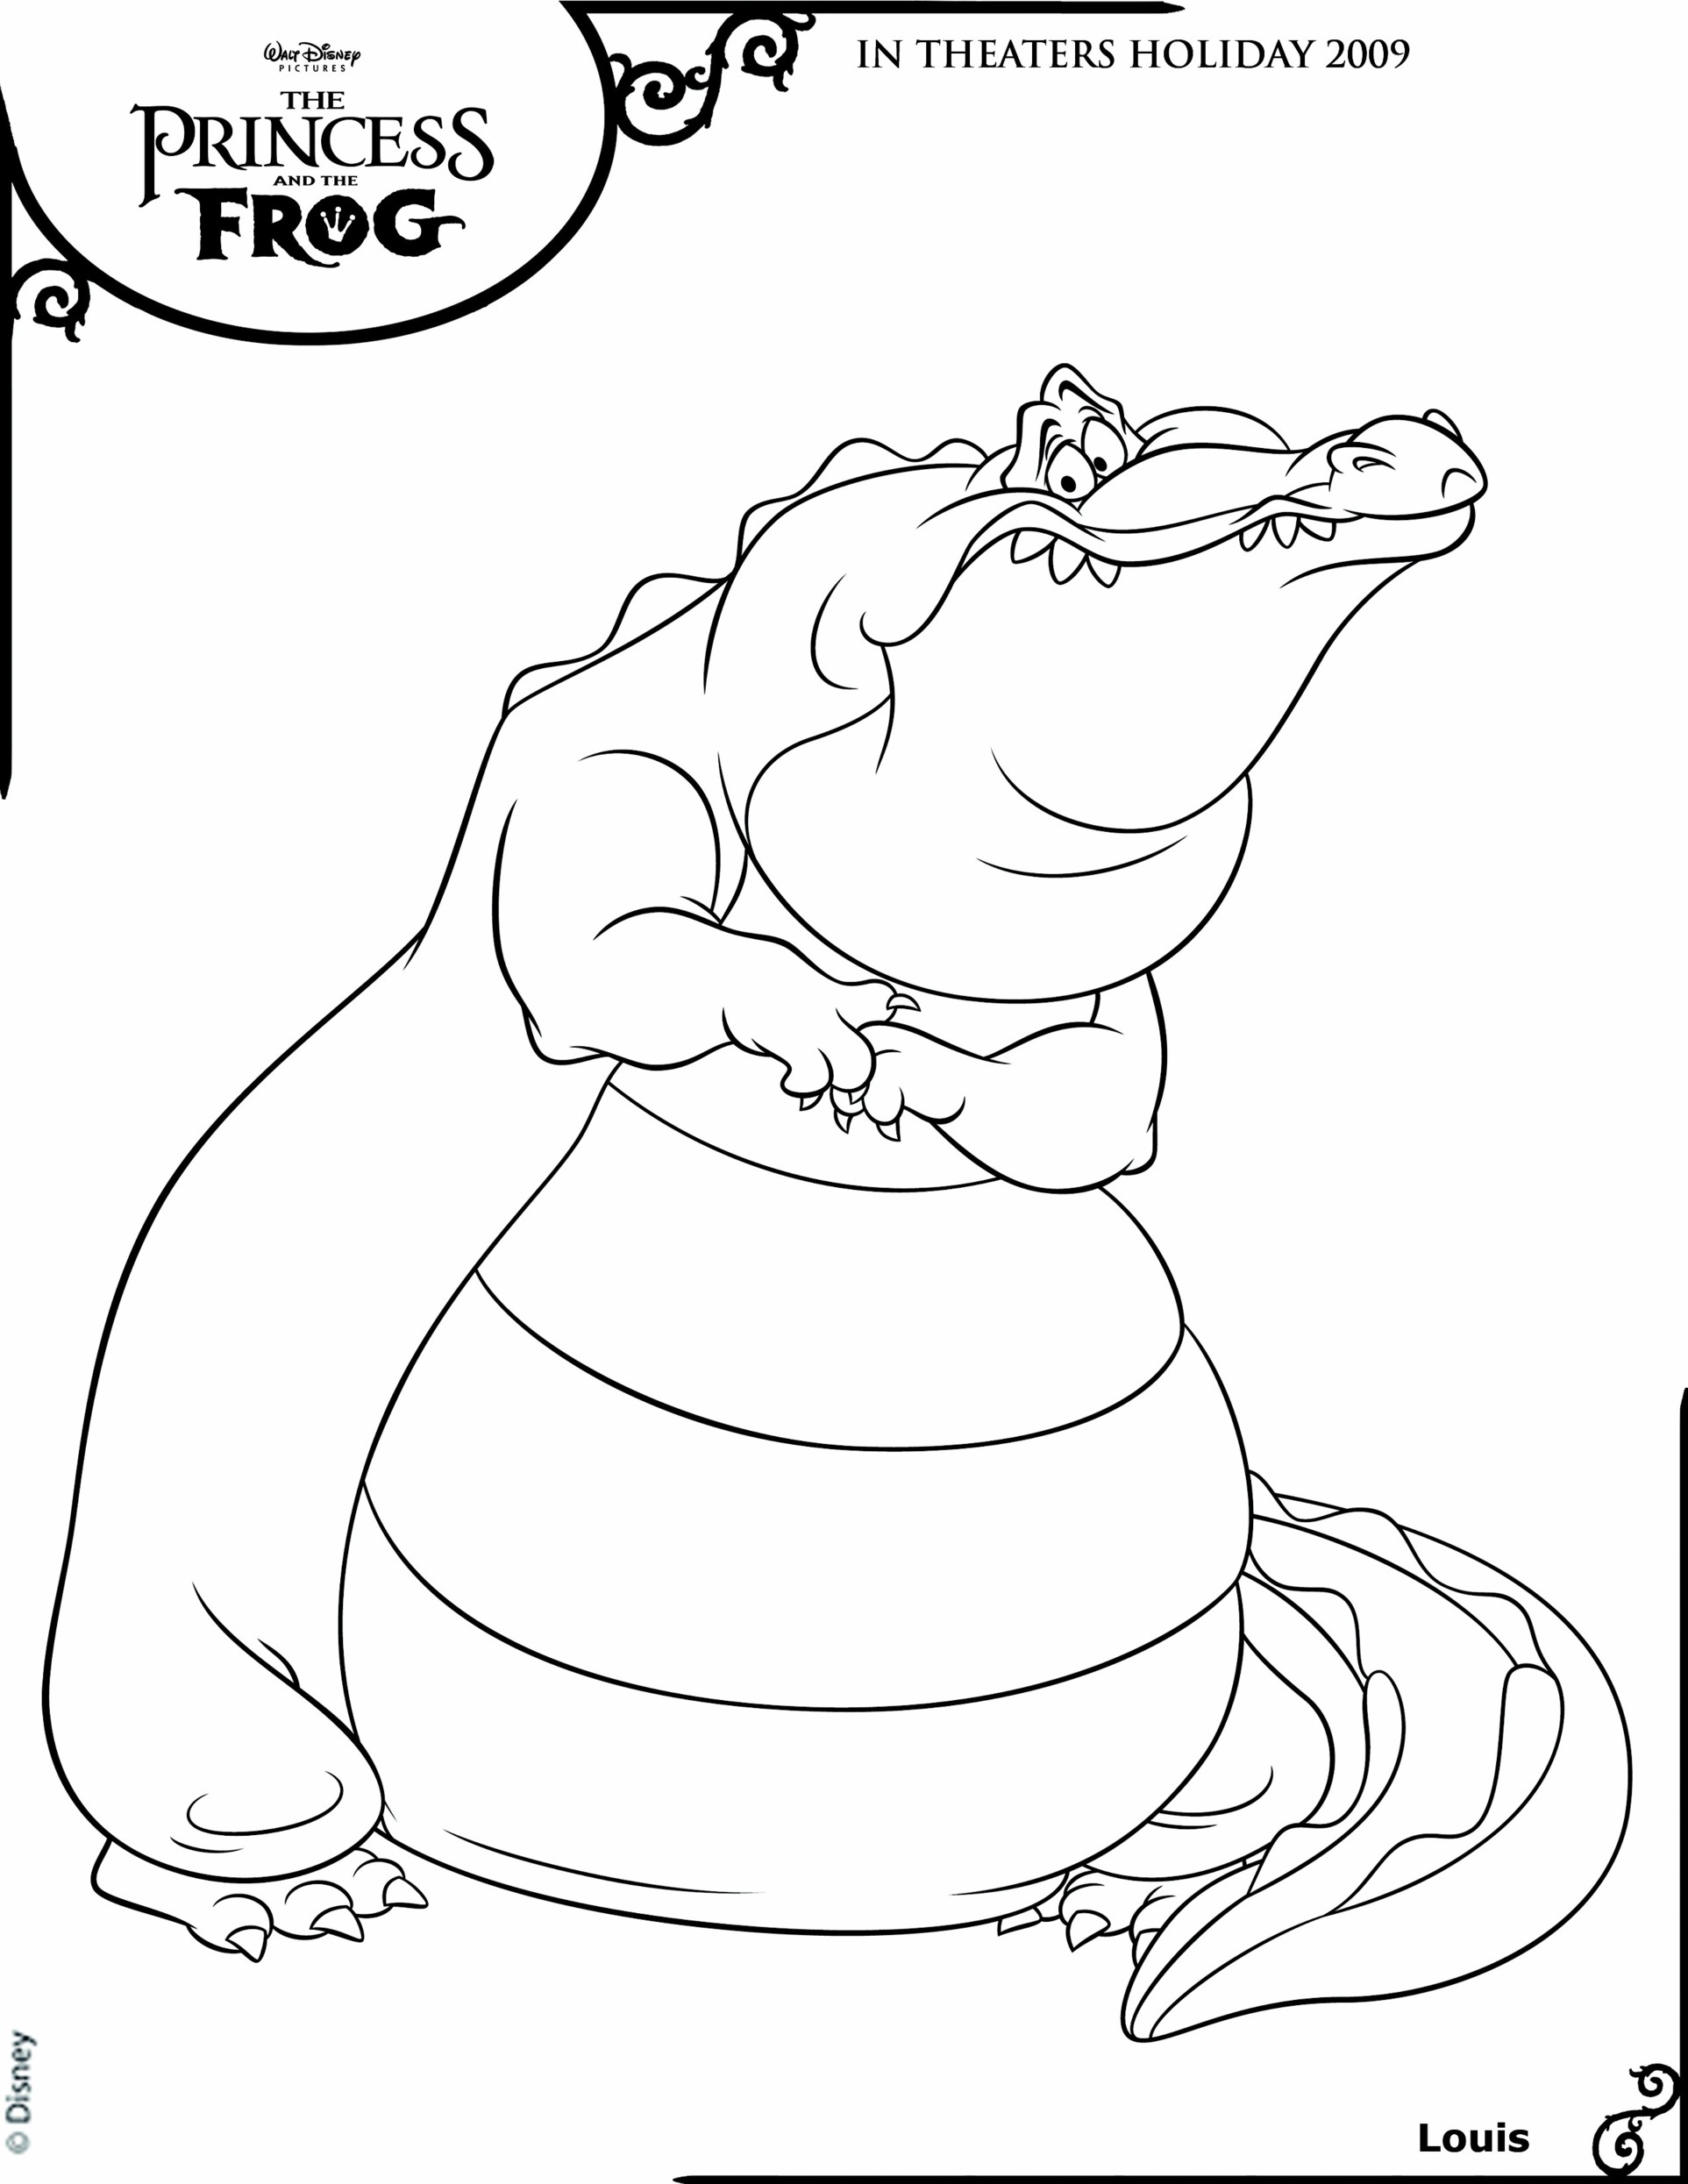 The alligator from The Princess and the Frog to color